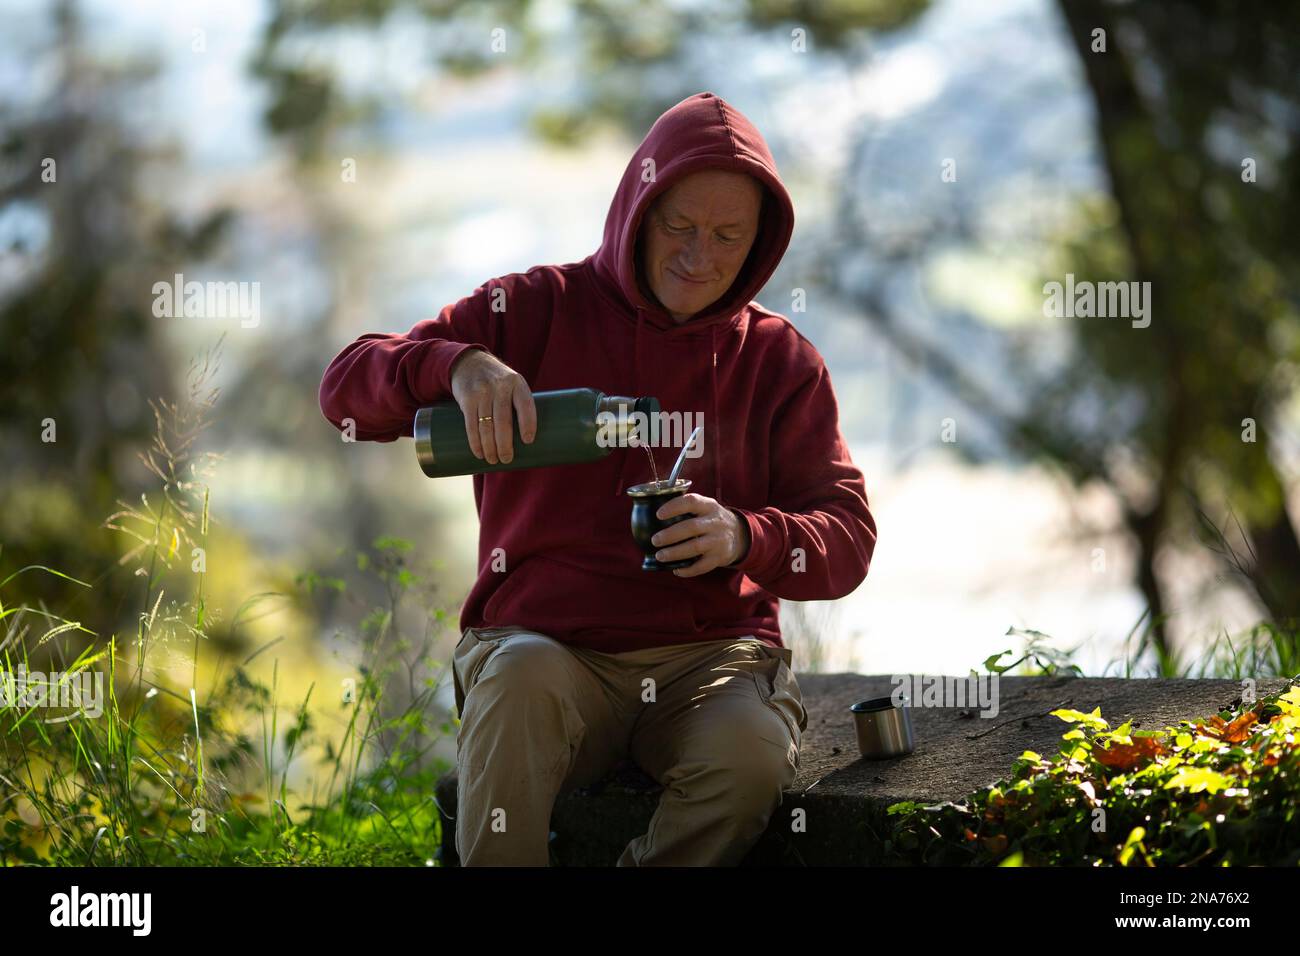 A man pours mate from a thermos into a mug in the park. Stock Photo